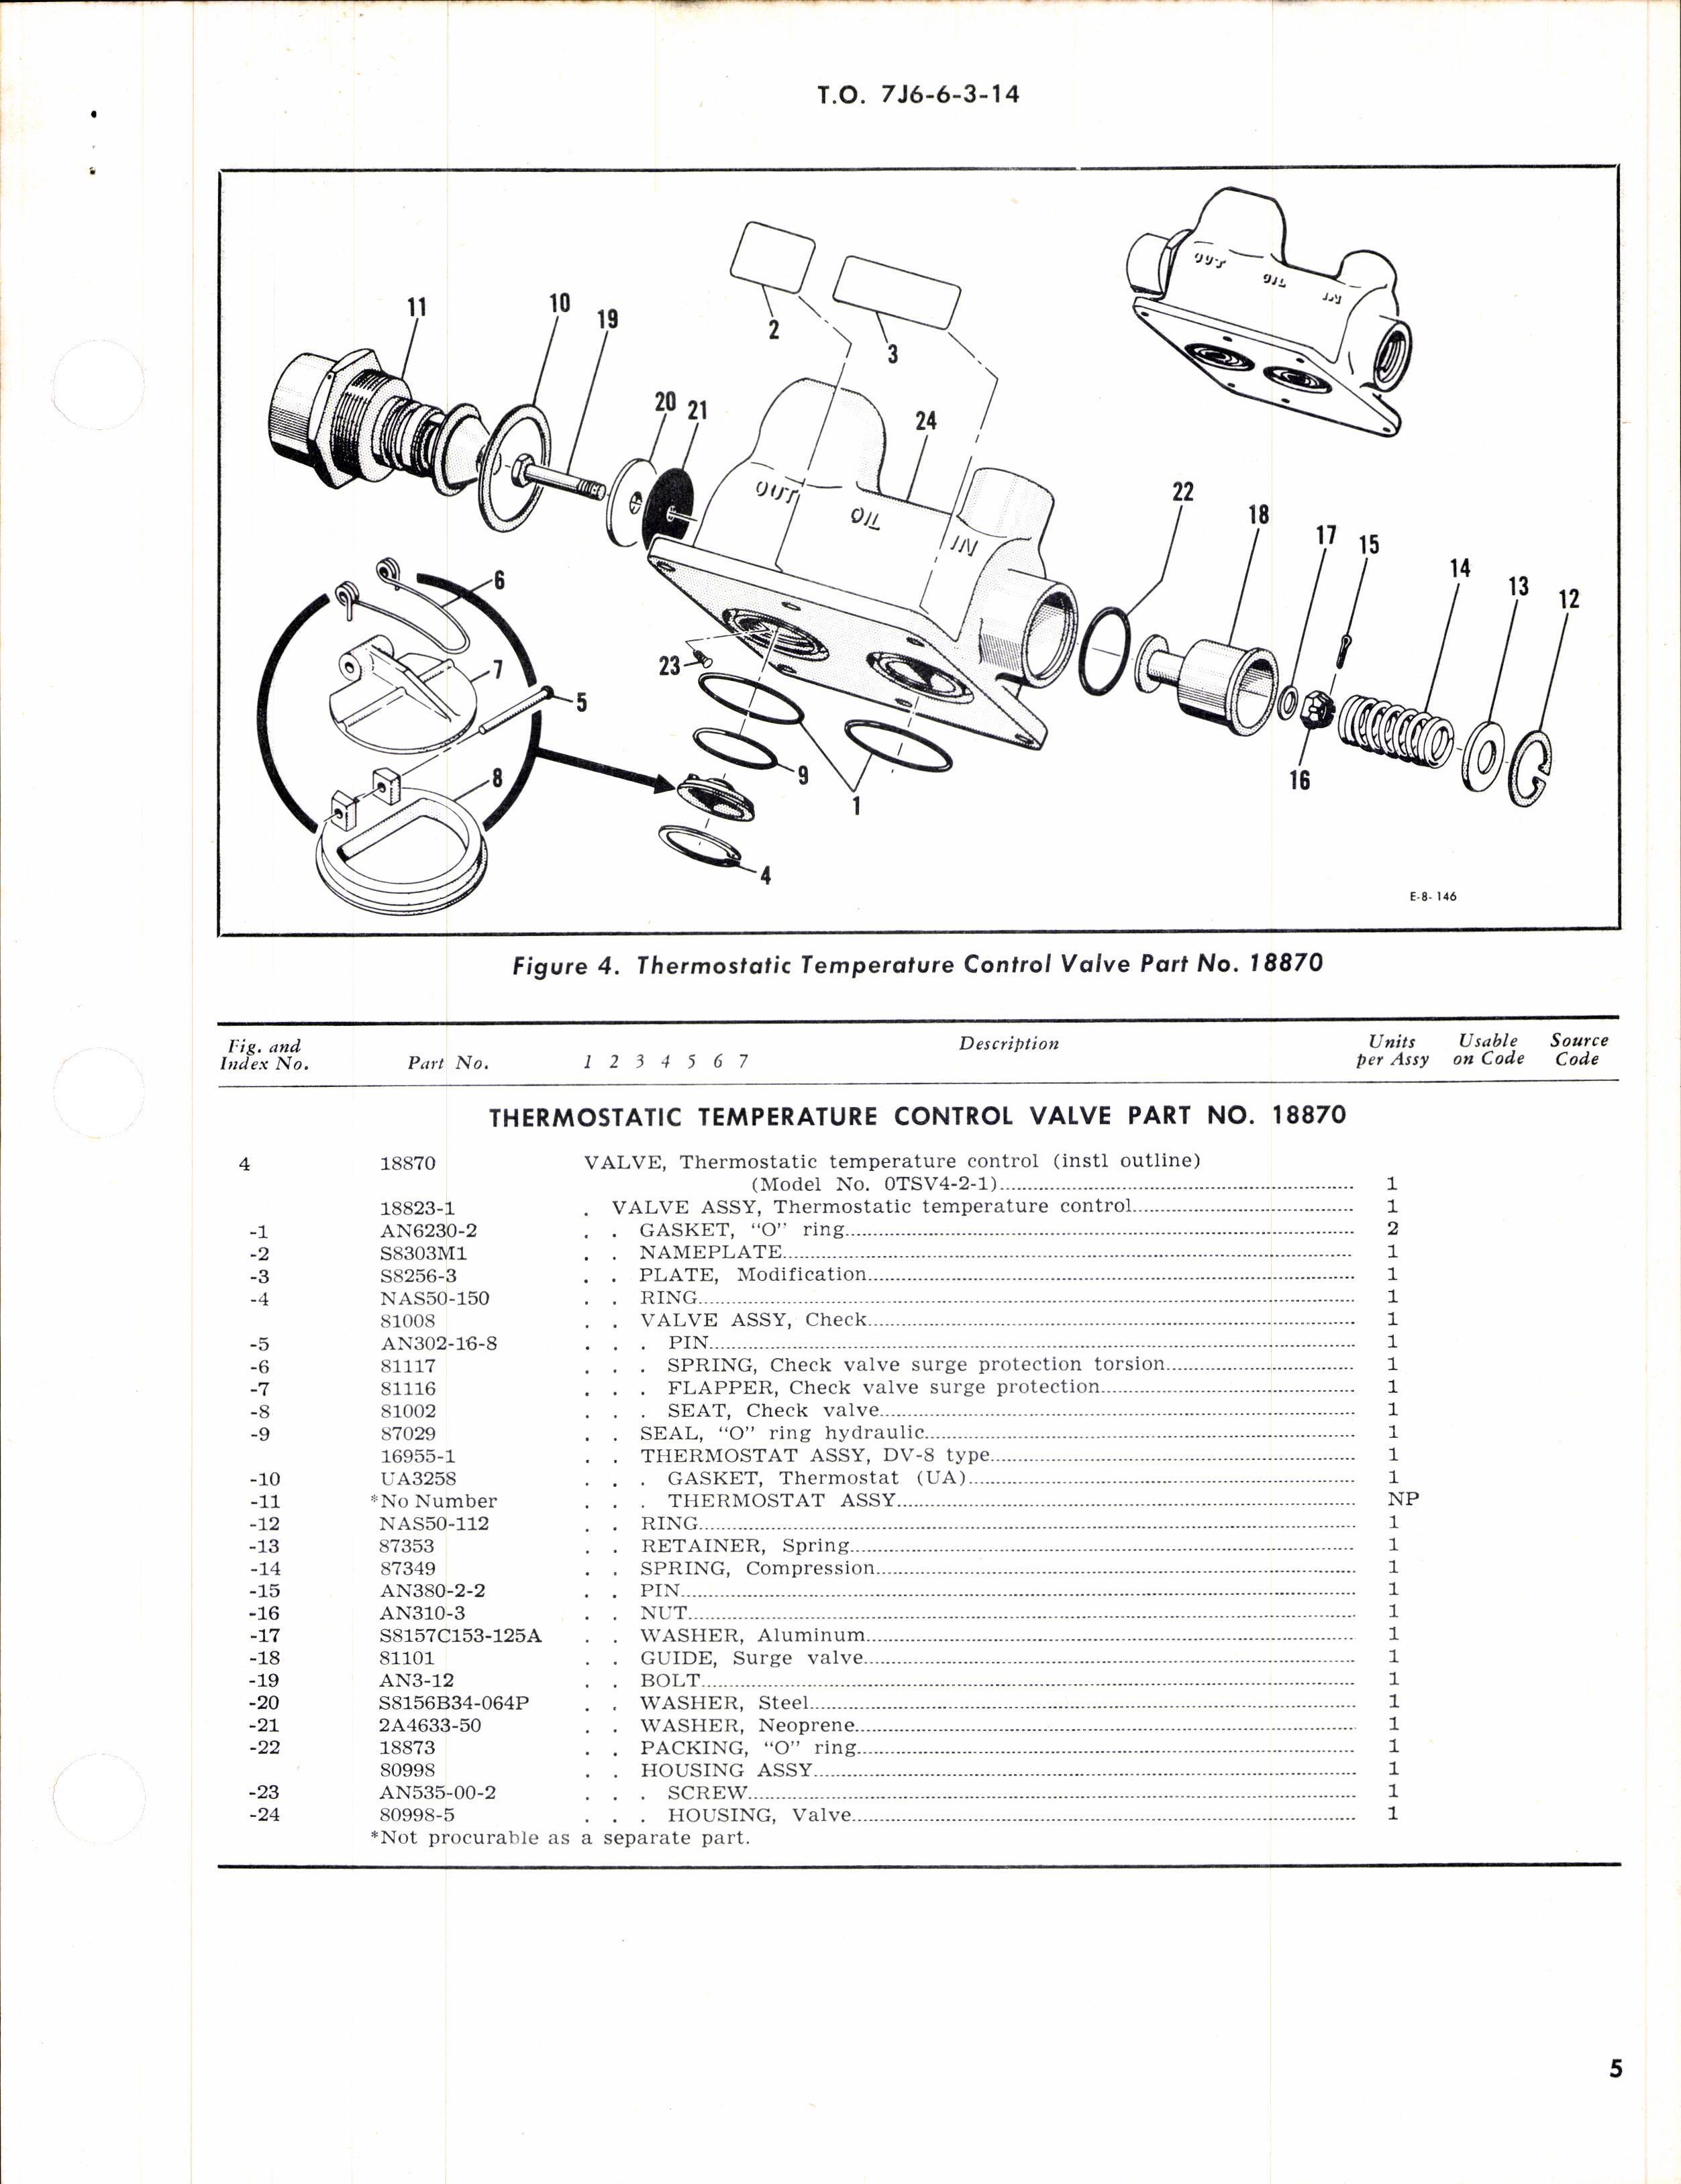 Sample page 5 from AirCorps Library document: Illustrated Parts Breakdown for Thermostatic Temperature Control Valves